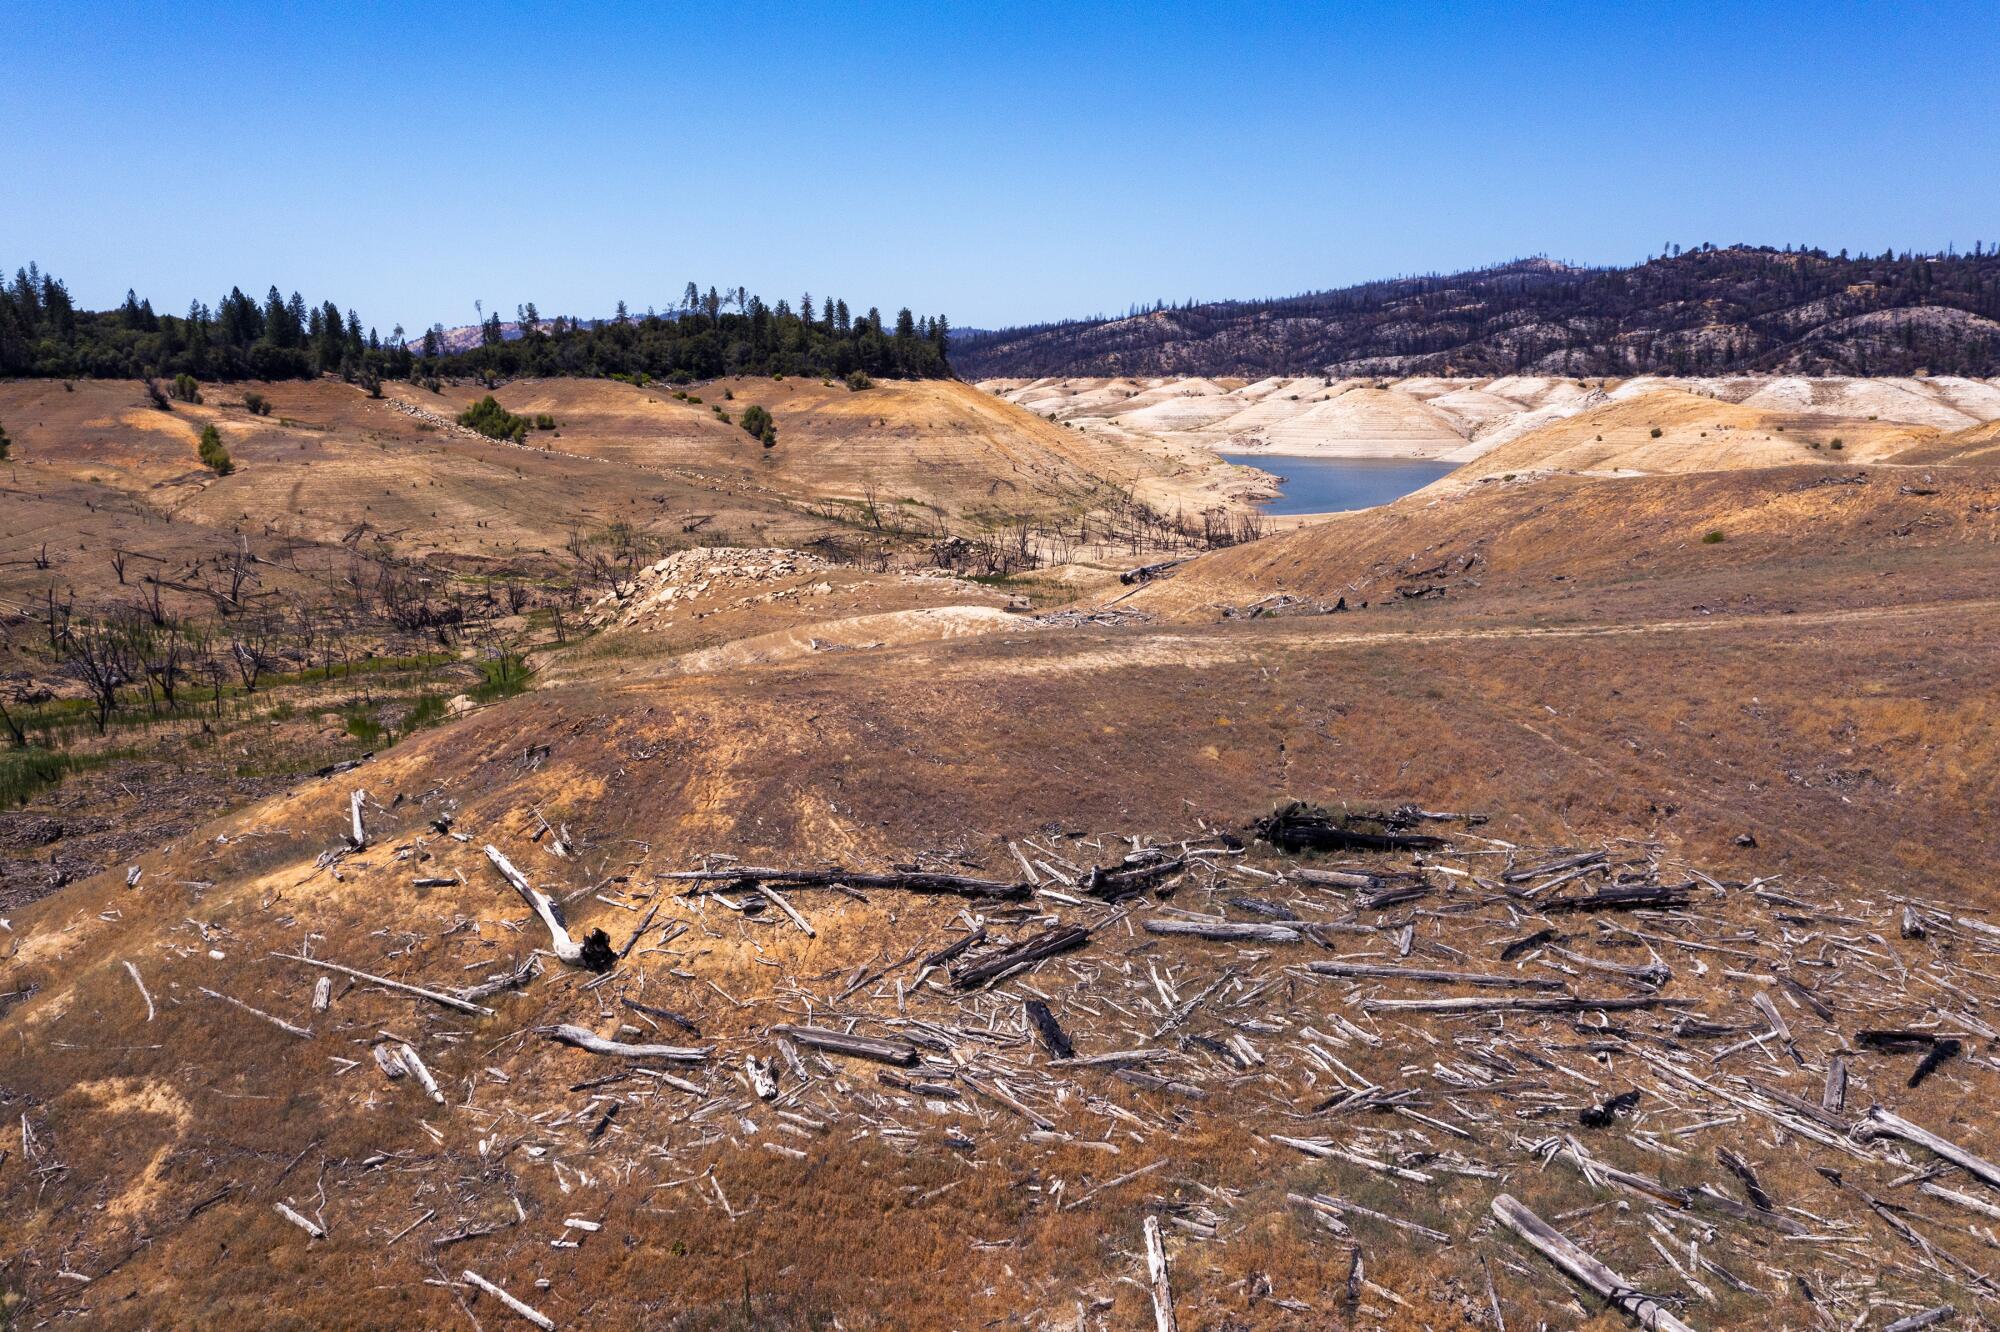 Downed trees once underwater are left exposed as water recedes on Lake Oroville.